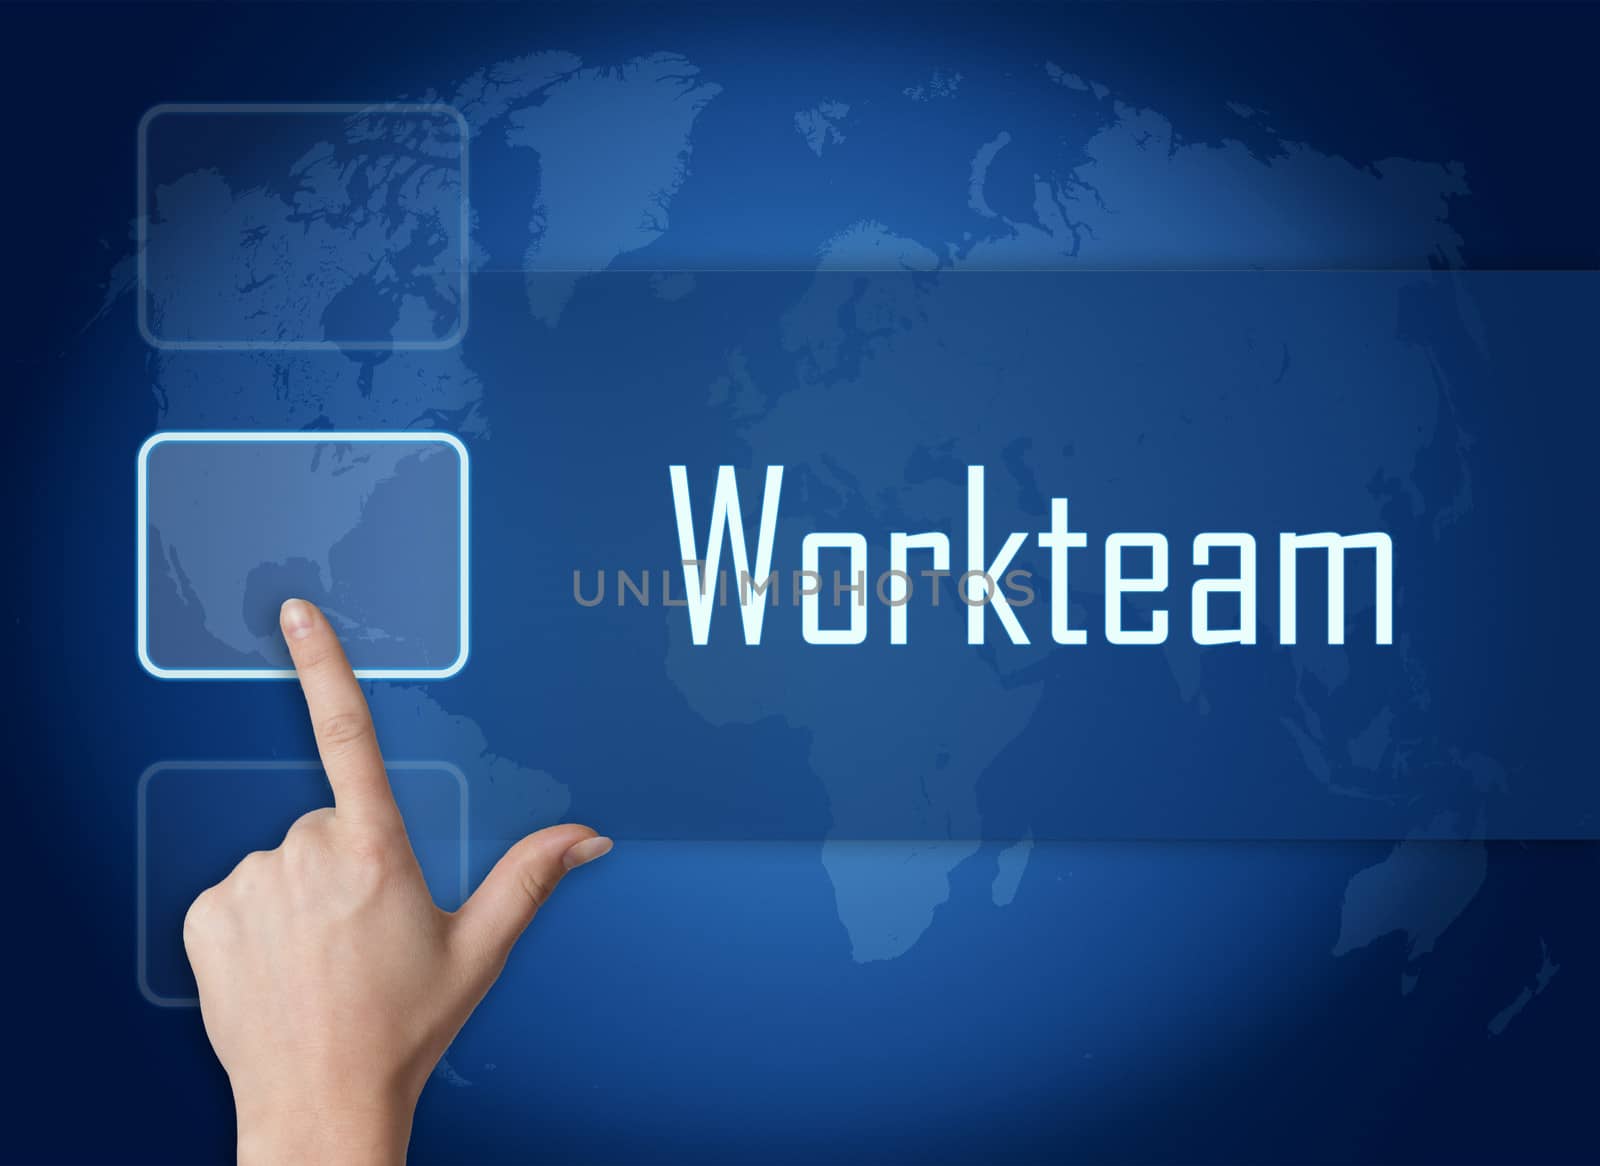 Workteam concept with interface and world map on blue background